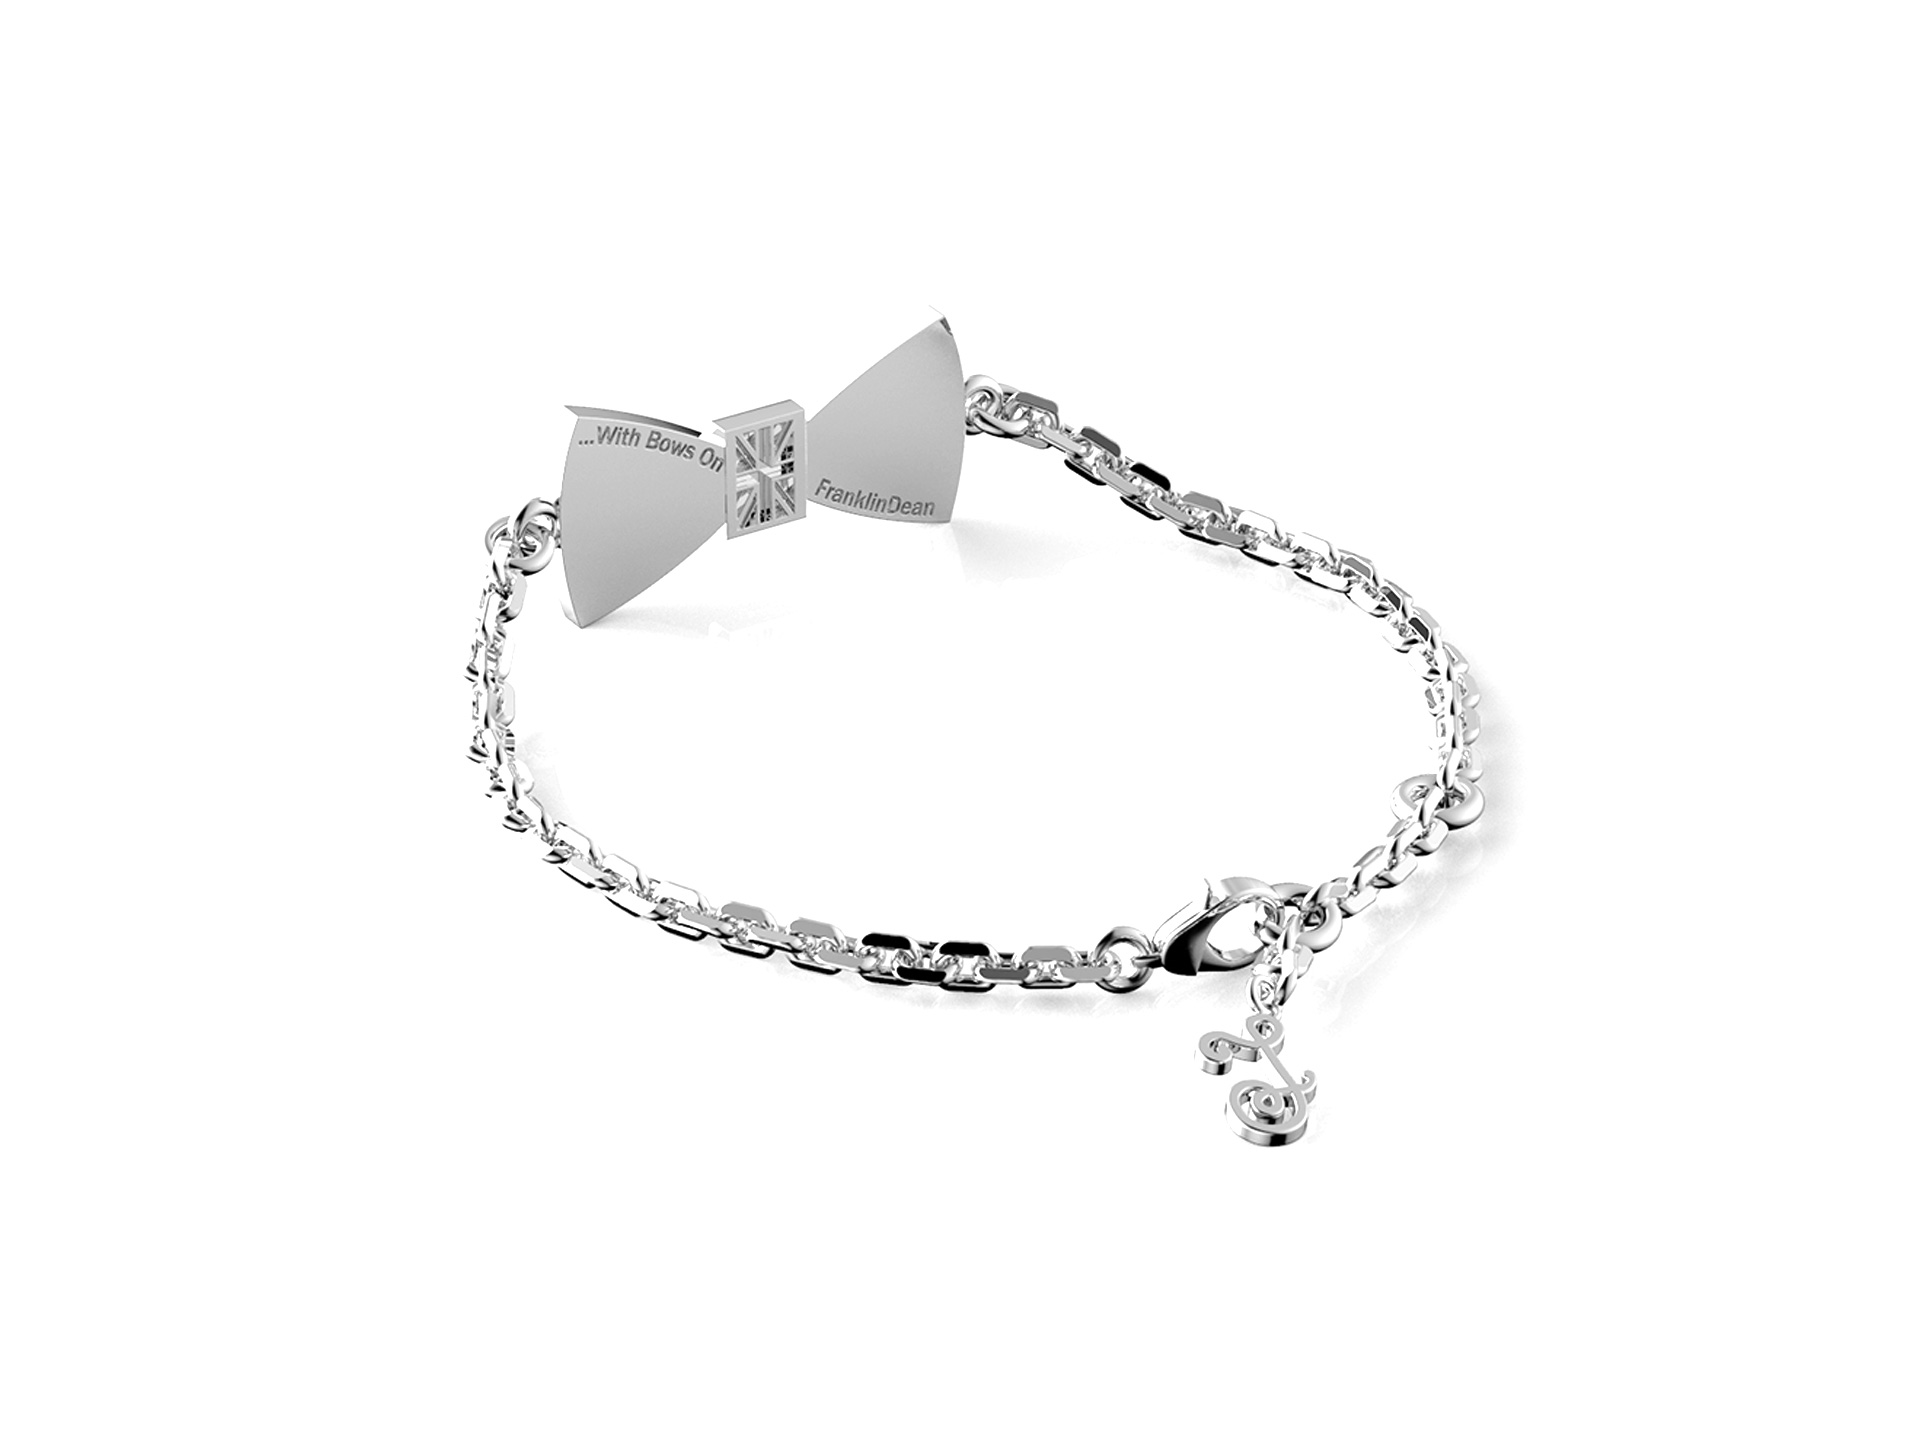 Bow Tie Bracelets with Engraved Monogram Disc